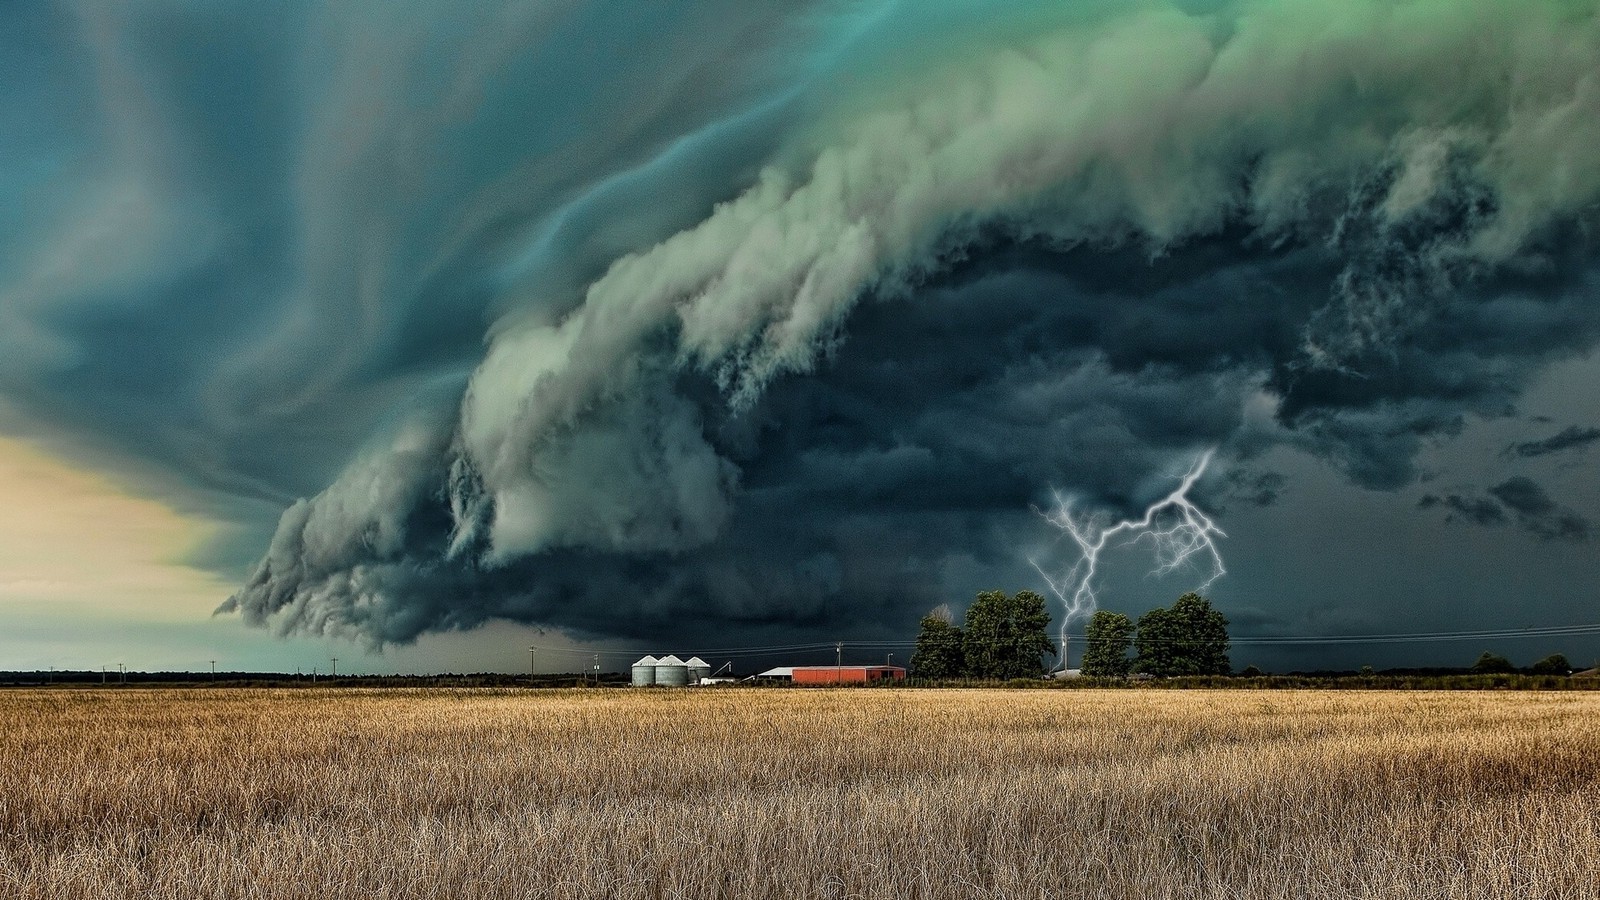 photography, Nature, Landscape, Supercell, Lightning, Farm, Storm, Clouds, Field Wallpaper